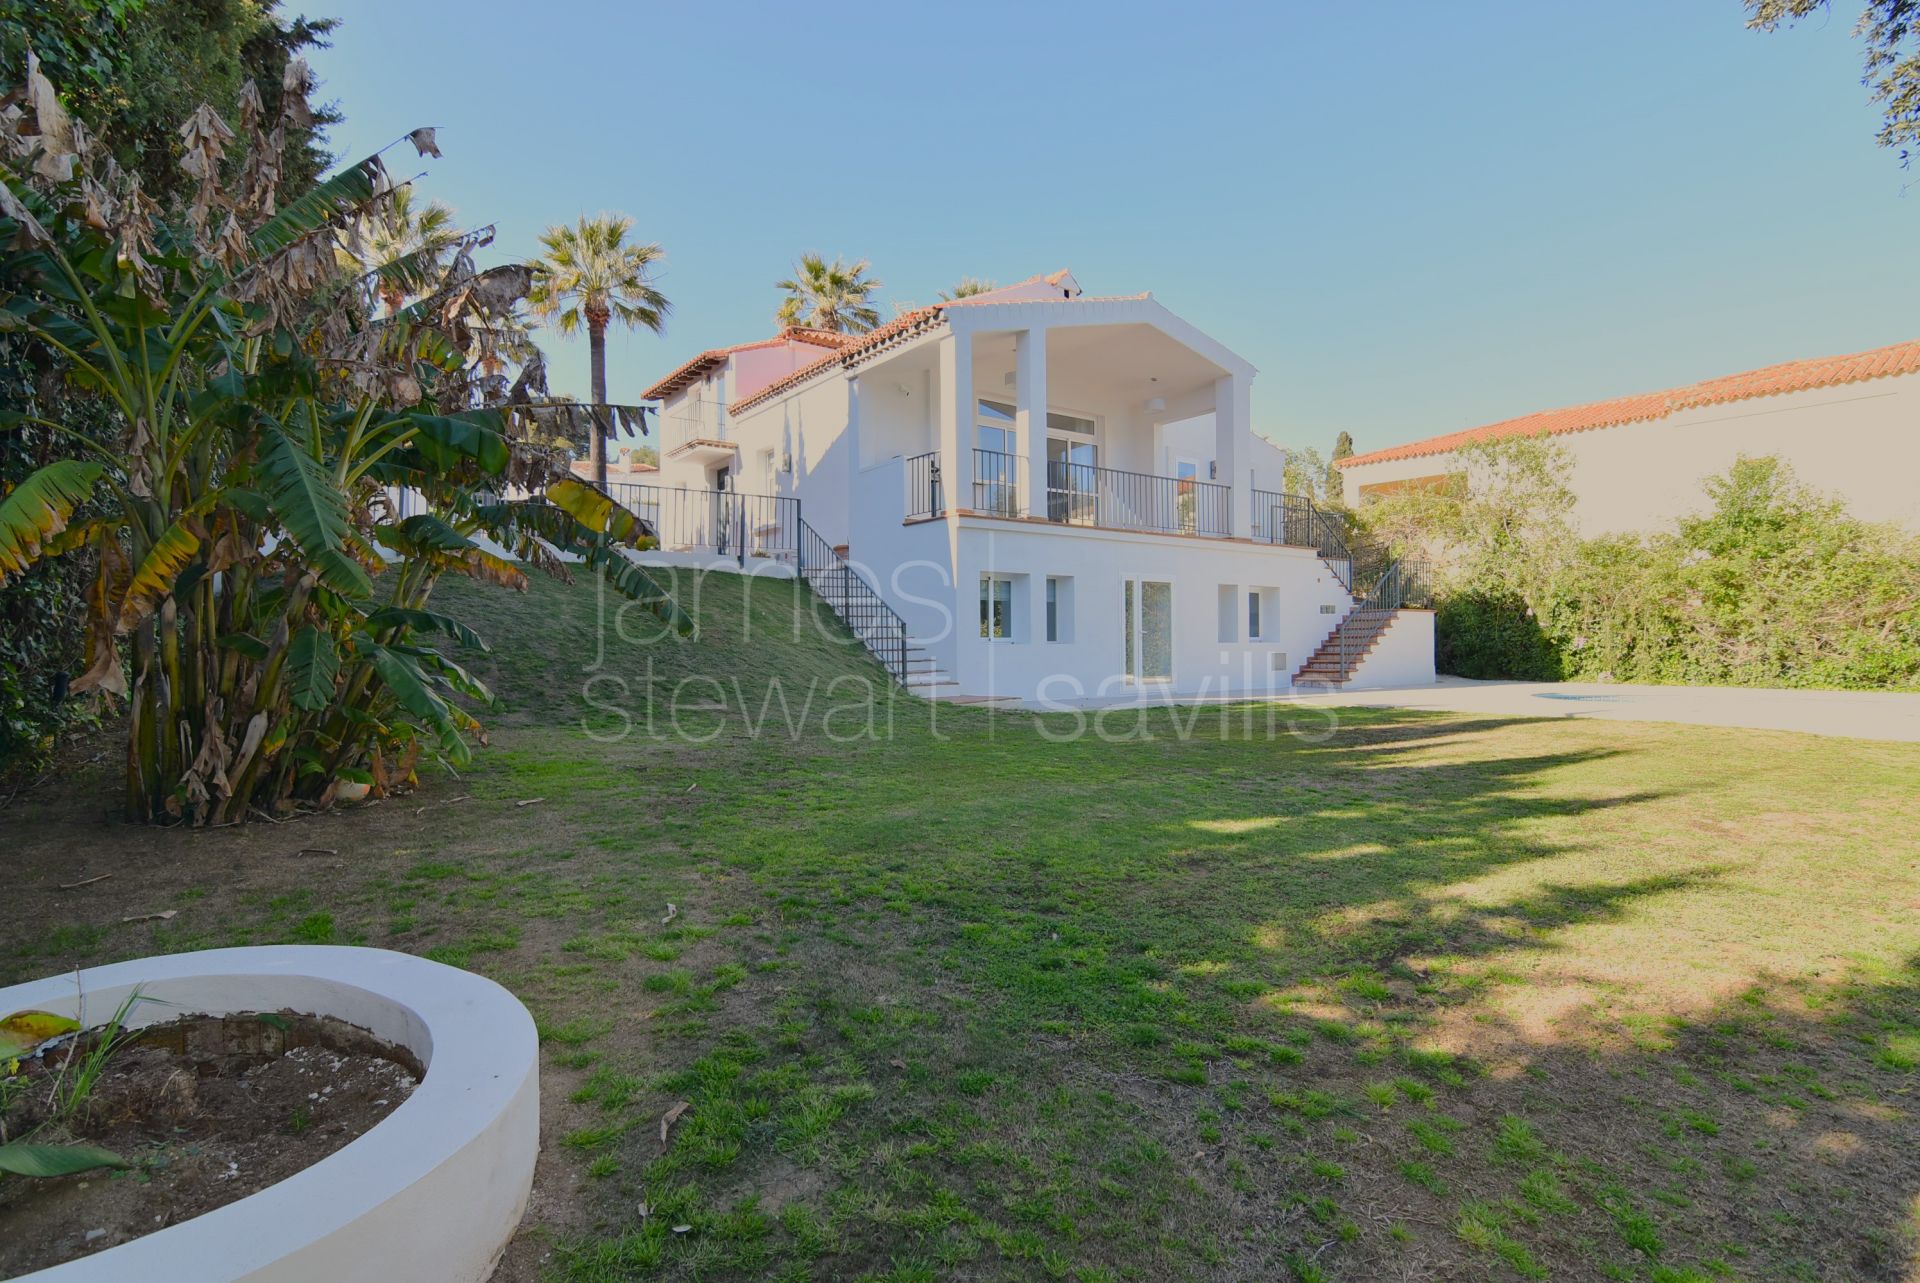 Great villa recently totally refurbished in the popular B zone of Sotogrande Costa